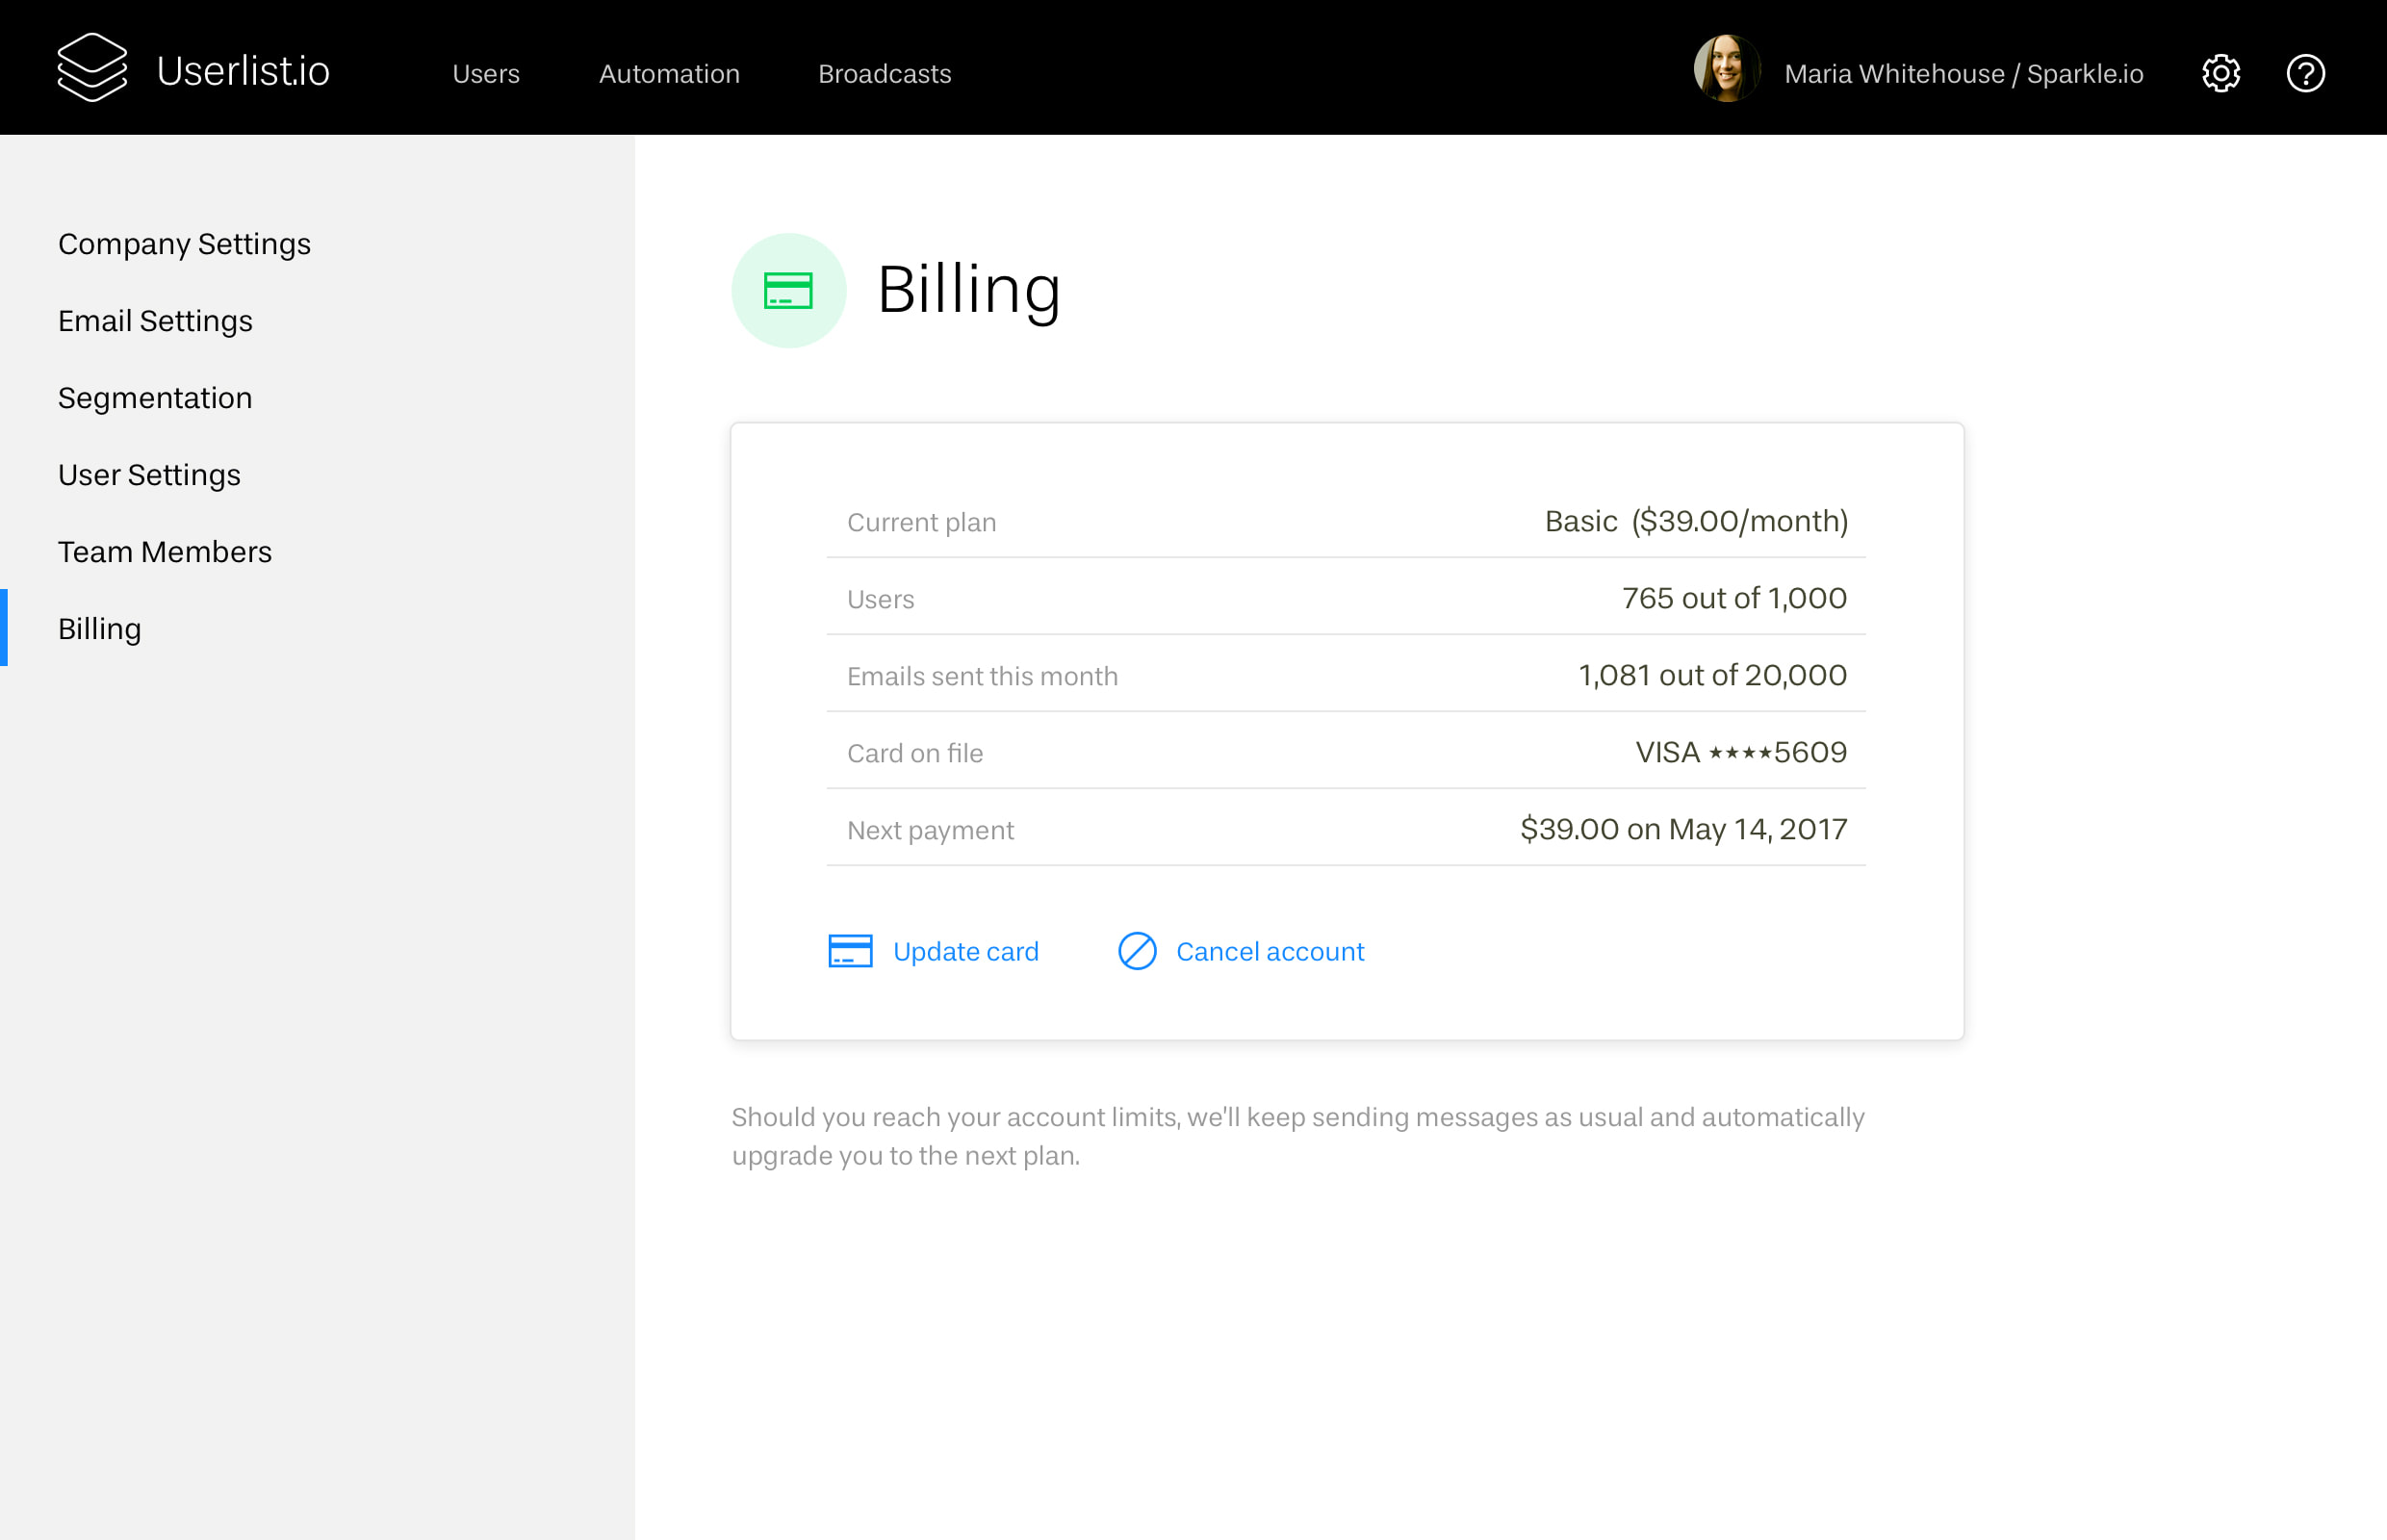 The Chicken or the Egg? Explaining Our Early Product Design Decisions: Screenshot of billing settings at Userlist